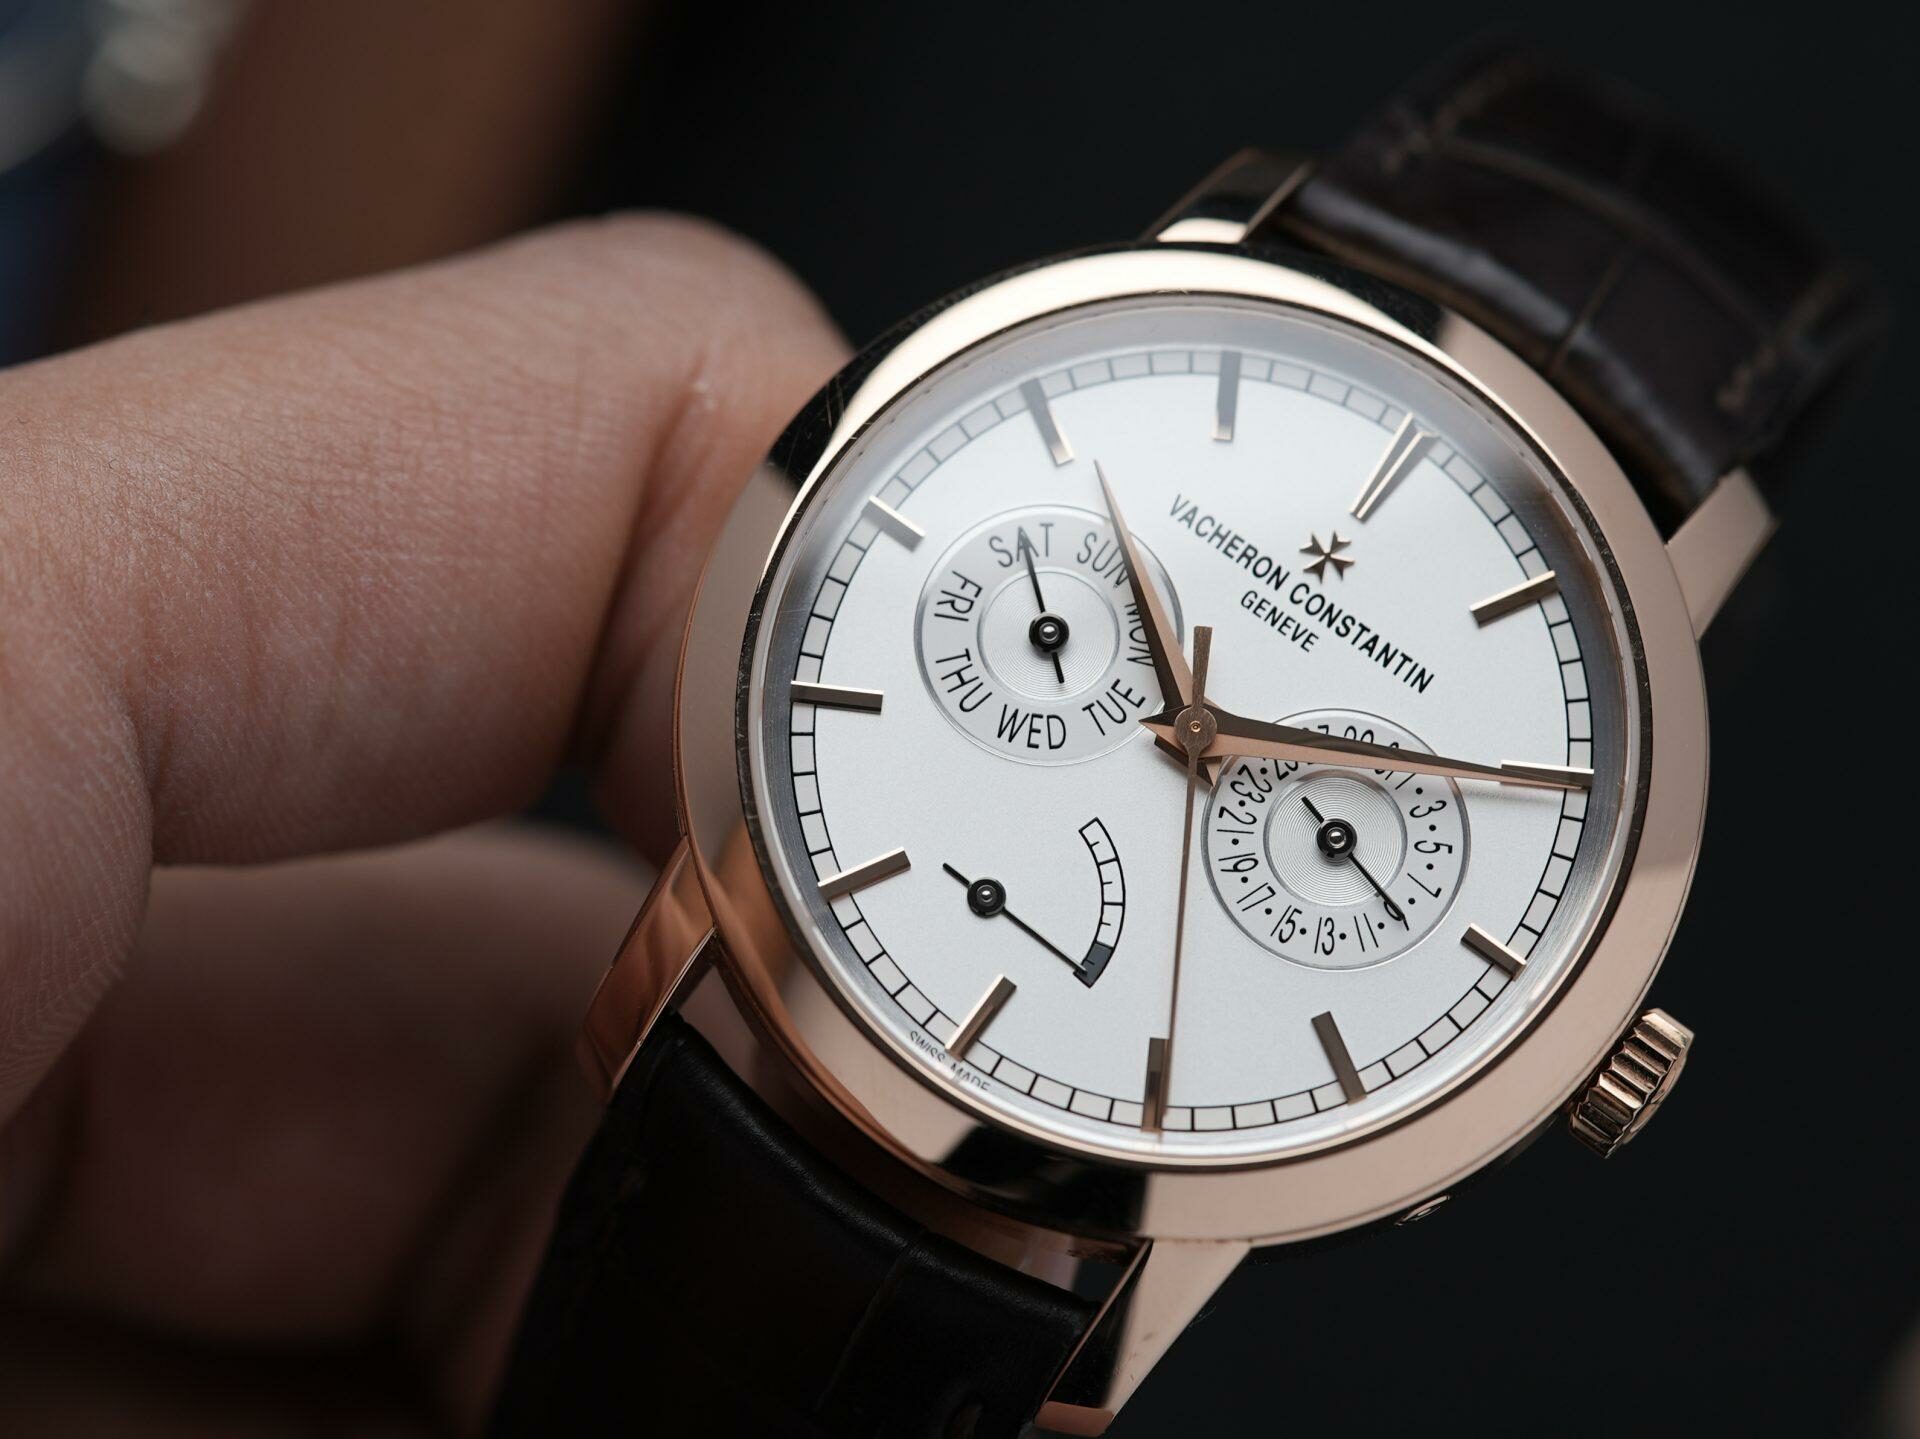 Vacheron Constantin Traditionnelle Day-date - Ticking Way